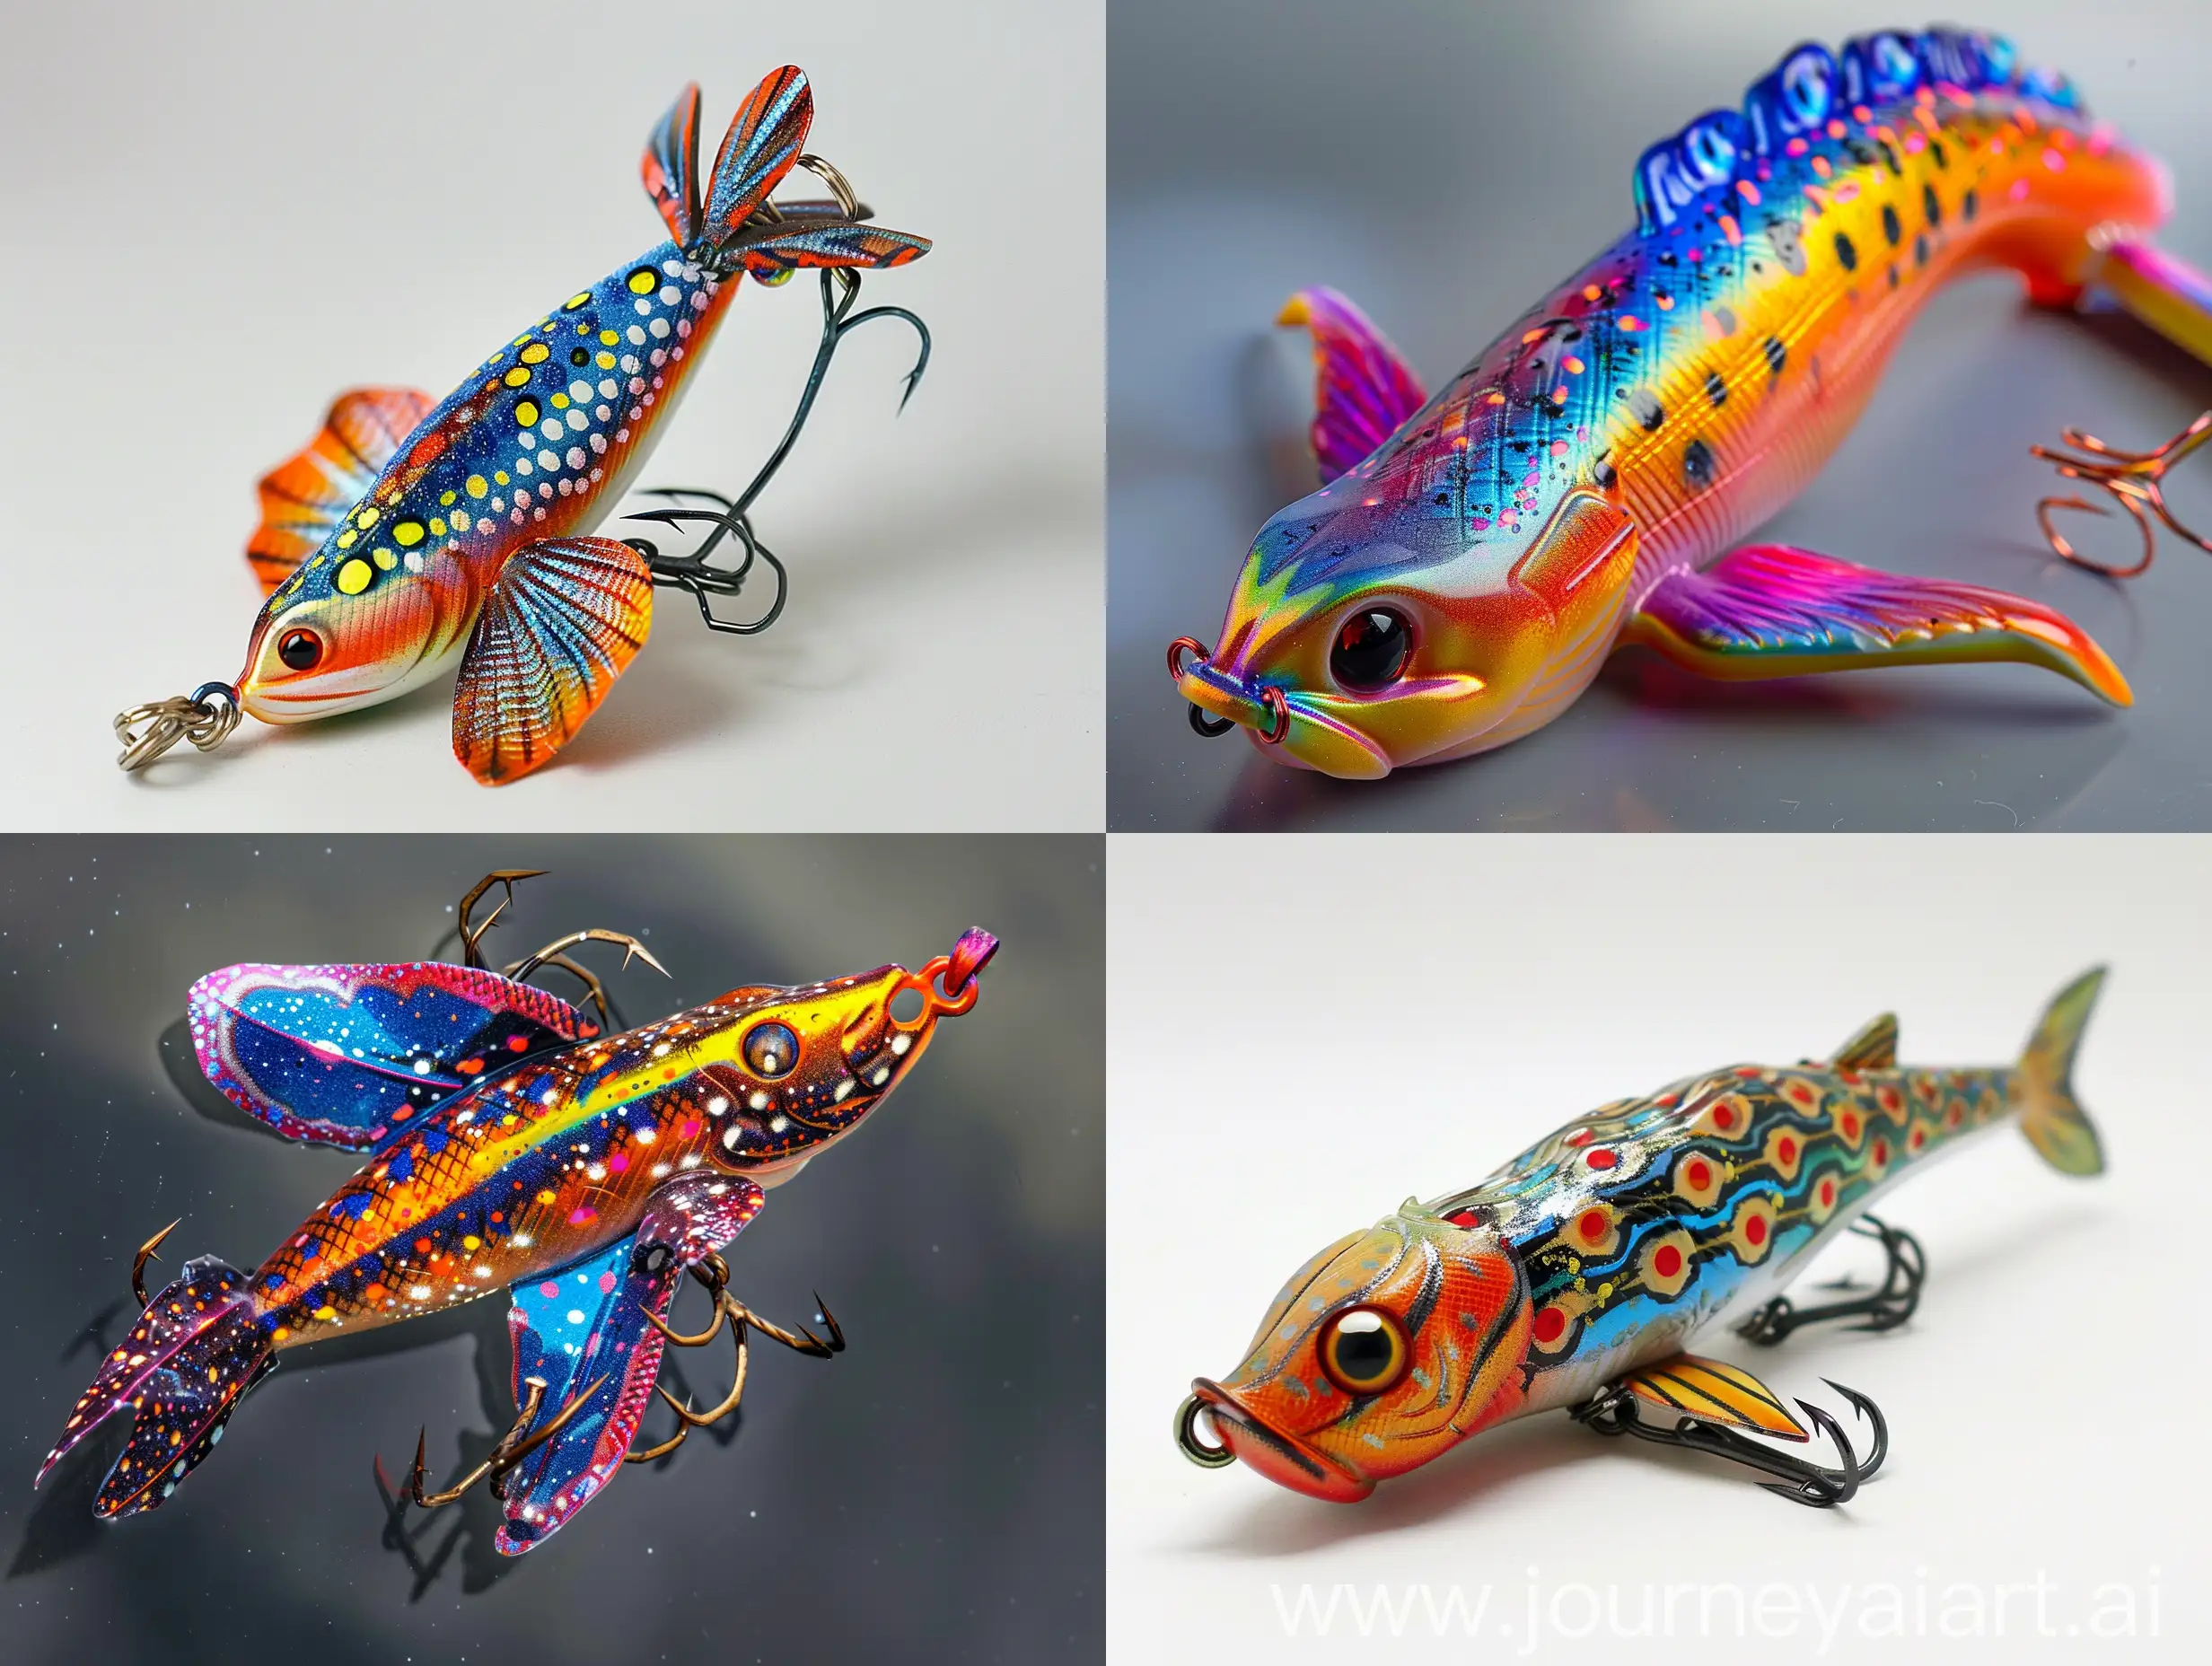 modern artificial lure, airbrush details ,color pigments.